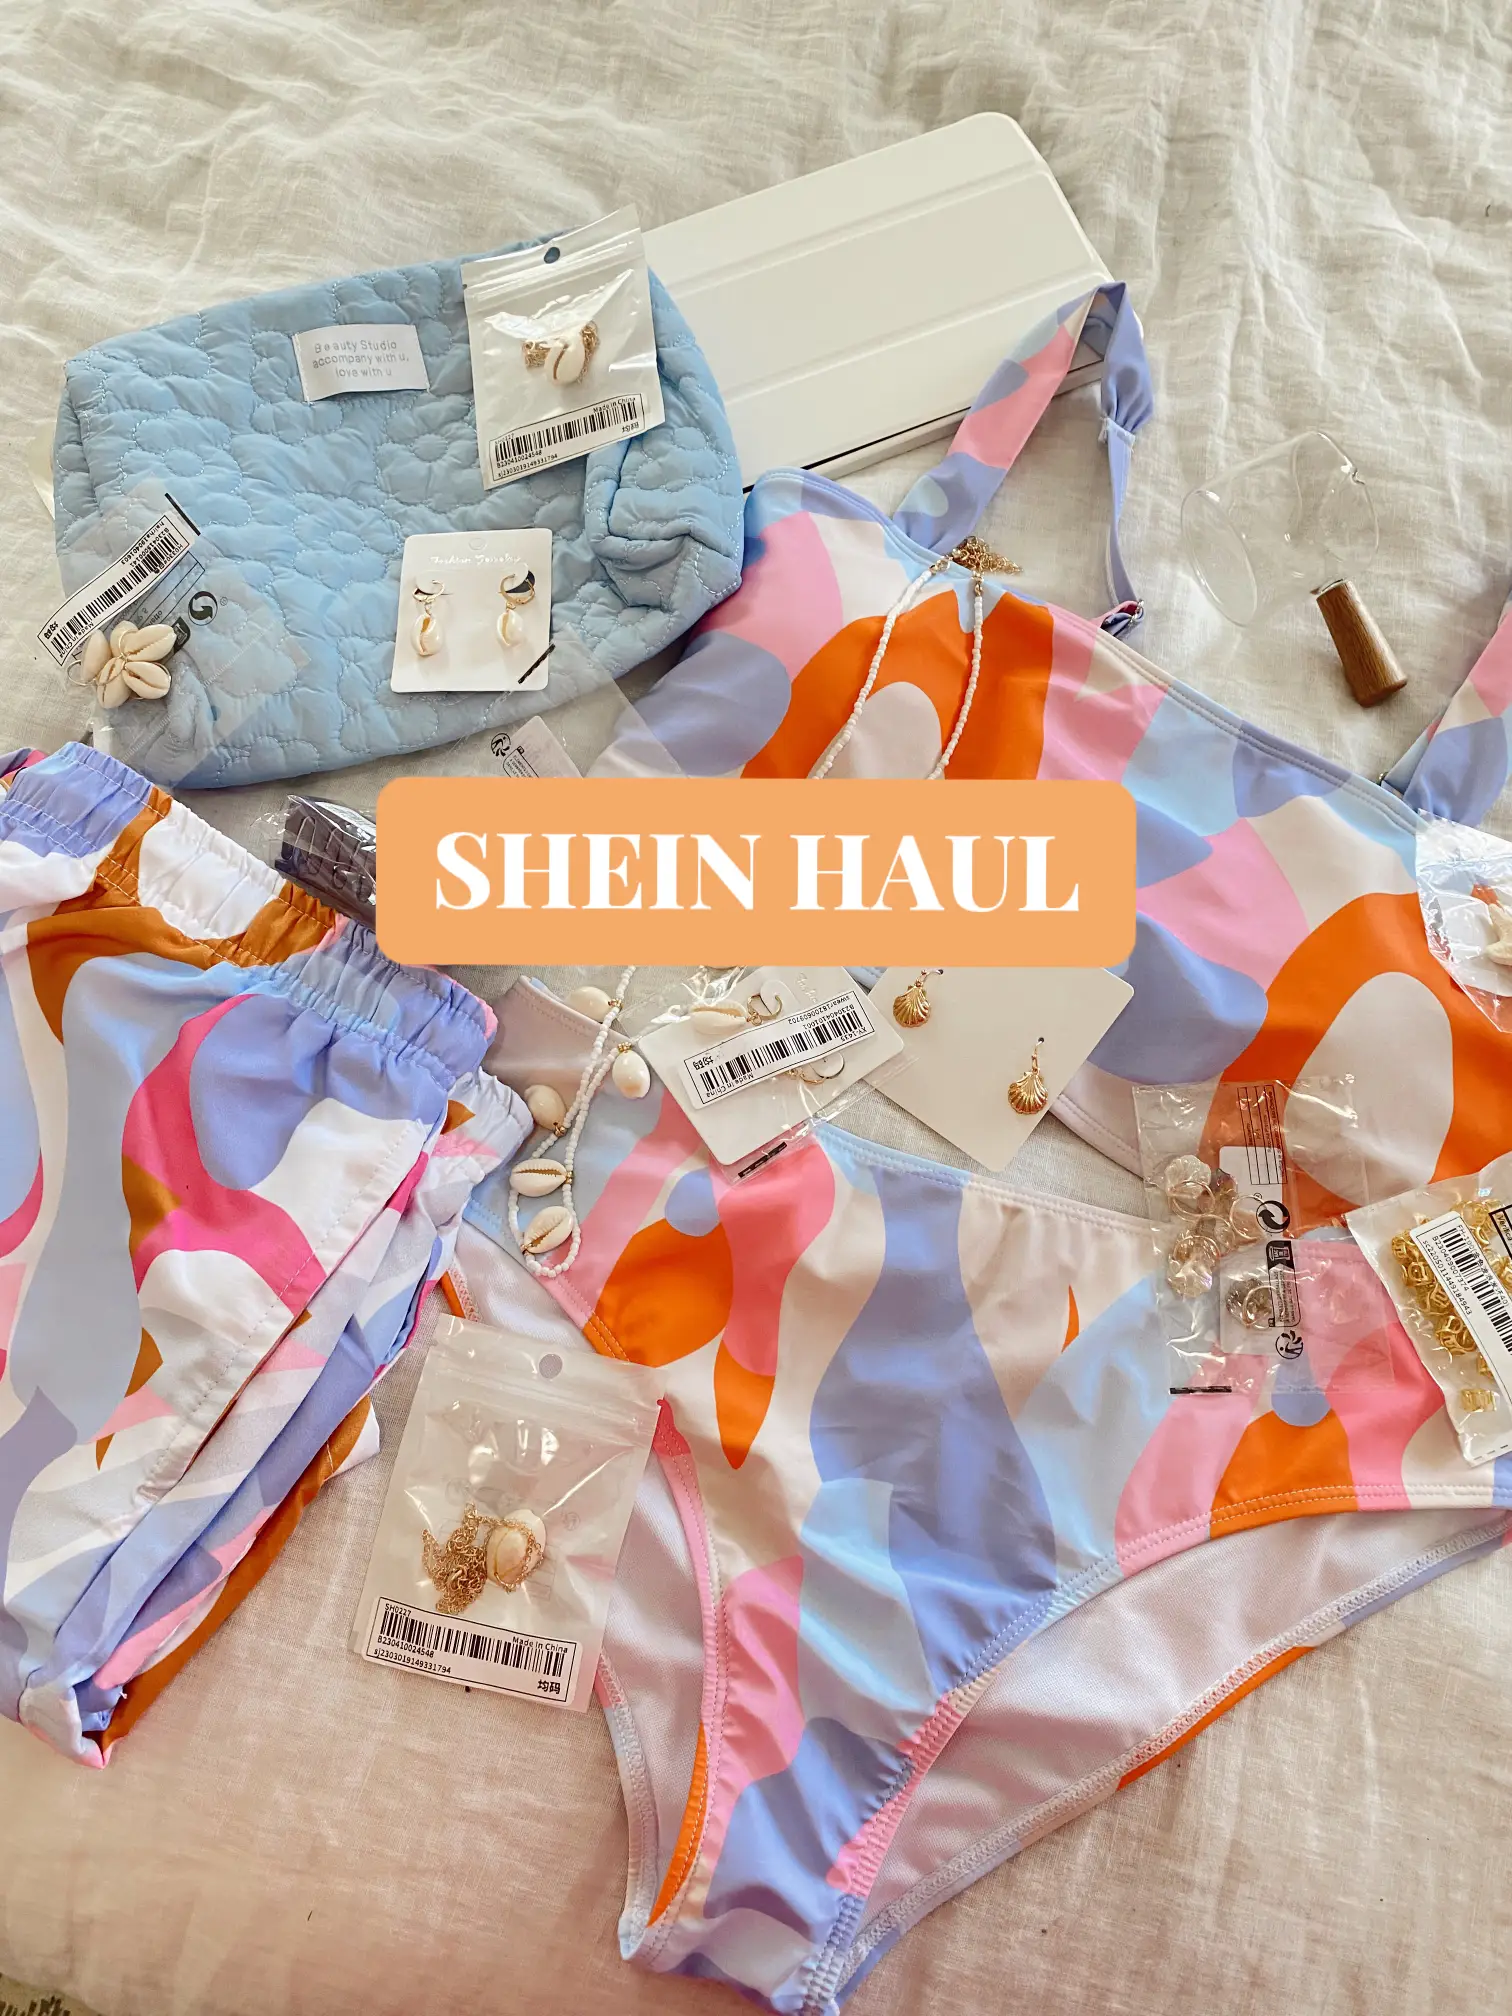 SHEIN HAUL's images